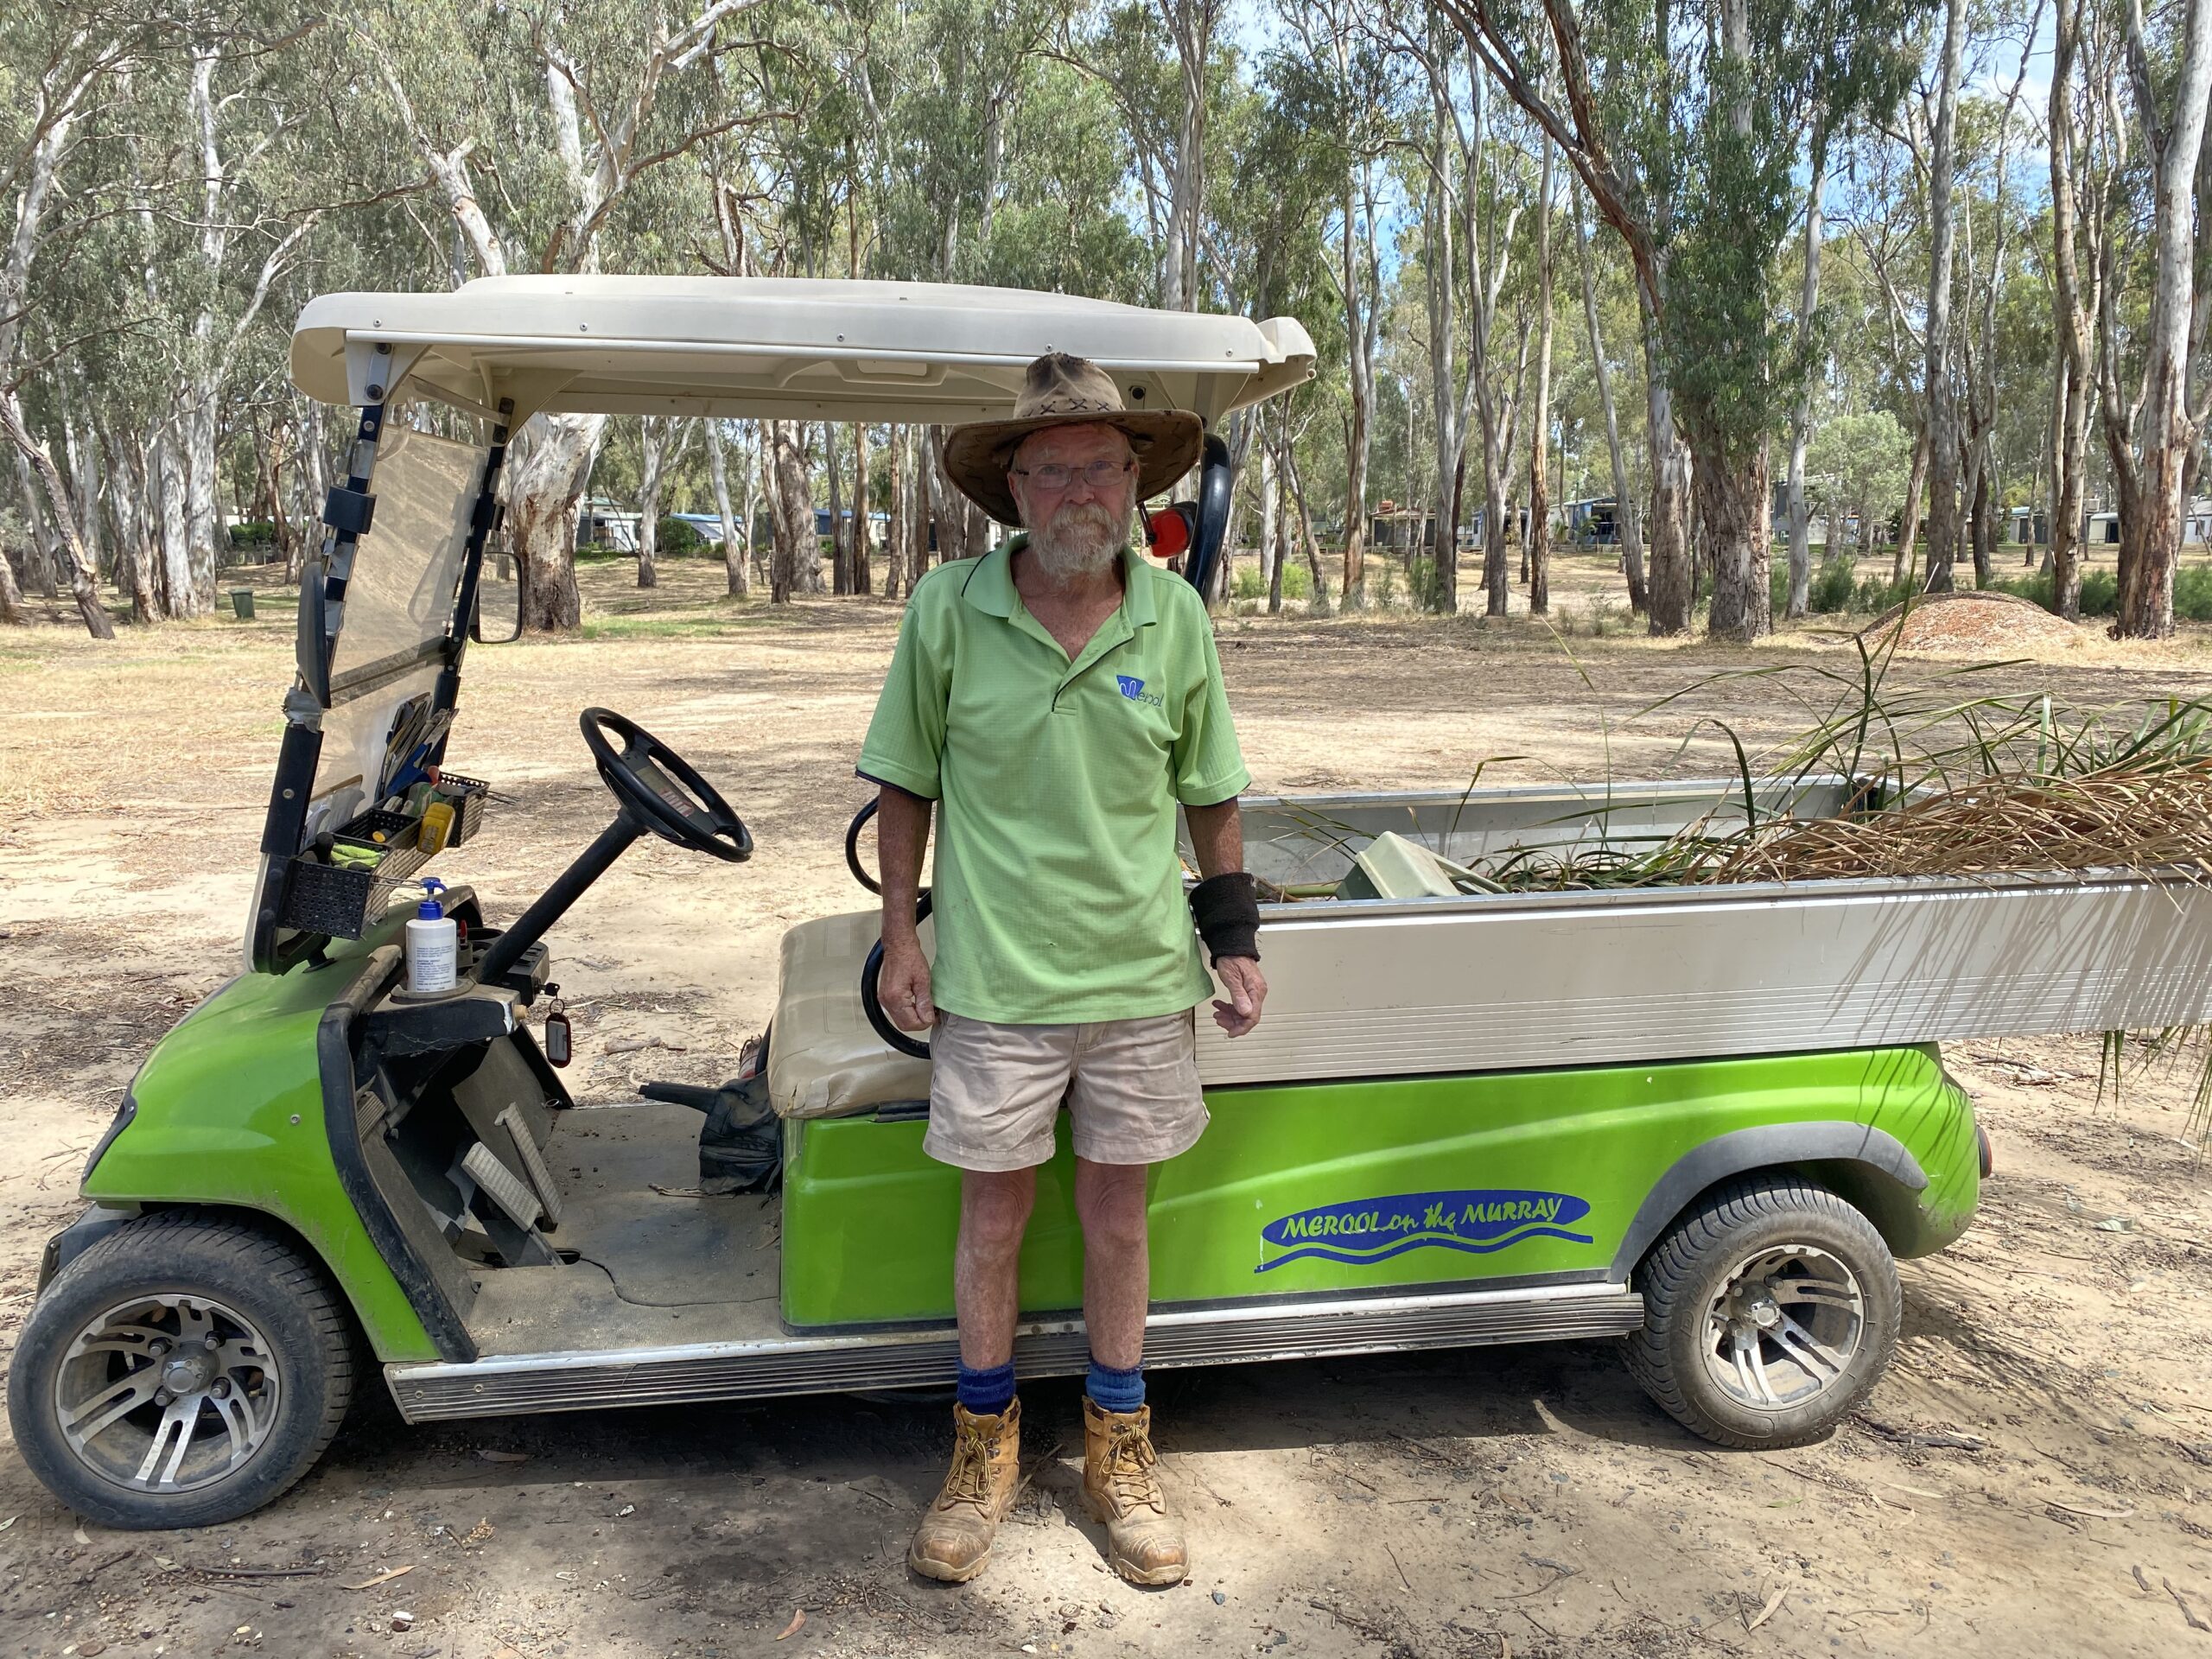 George Dick wearing his work uniform of a green t-shirt, shorts, work boots and a wide brimmed hat standing proudly infront of his green golf kart in the holiday park gardens. 